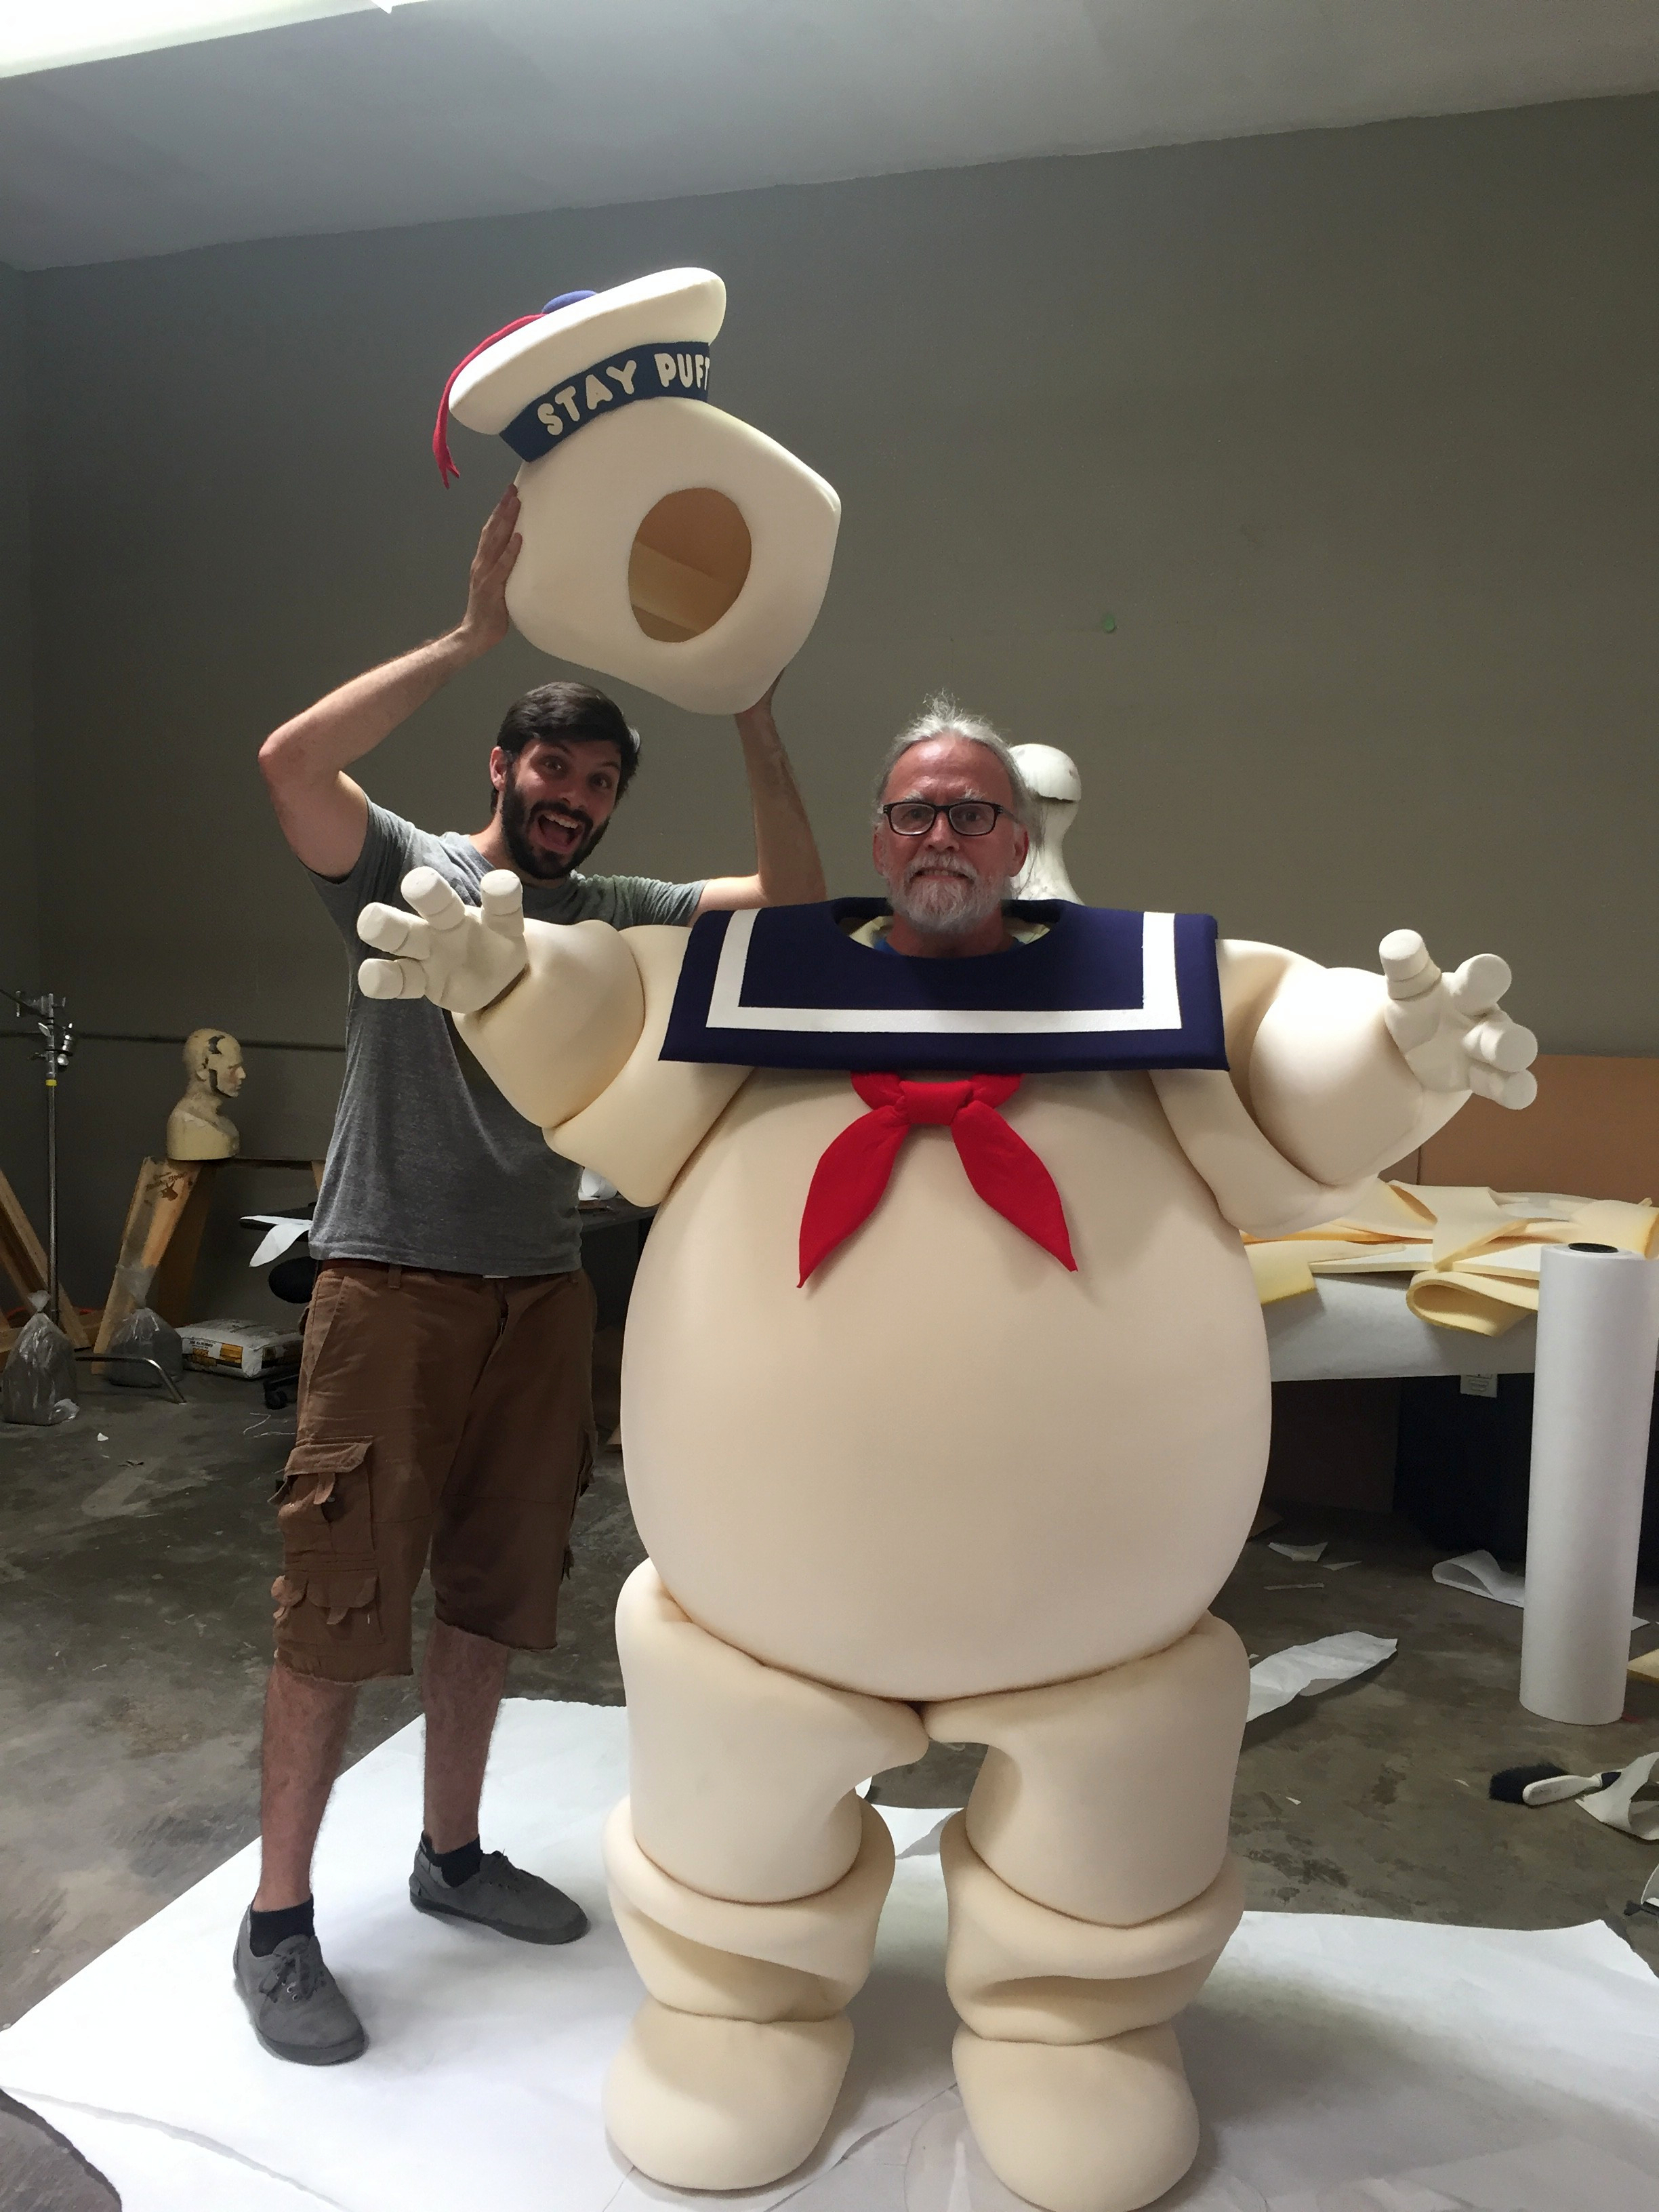 Â Stay Puft Marshmallow Man suit maker AND performer. 